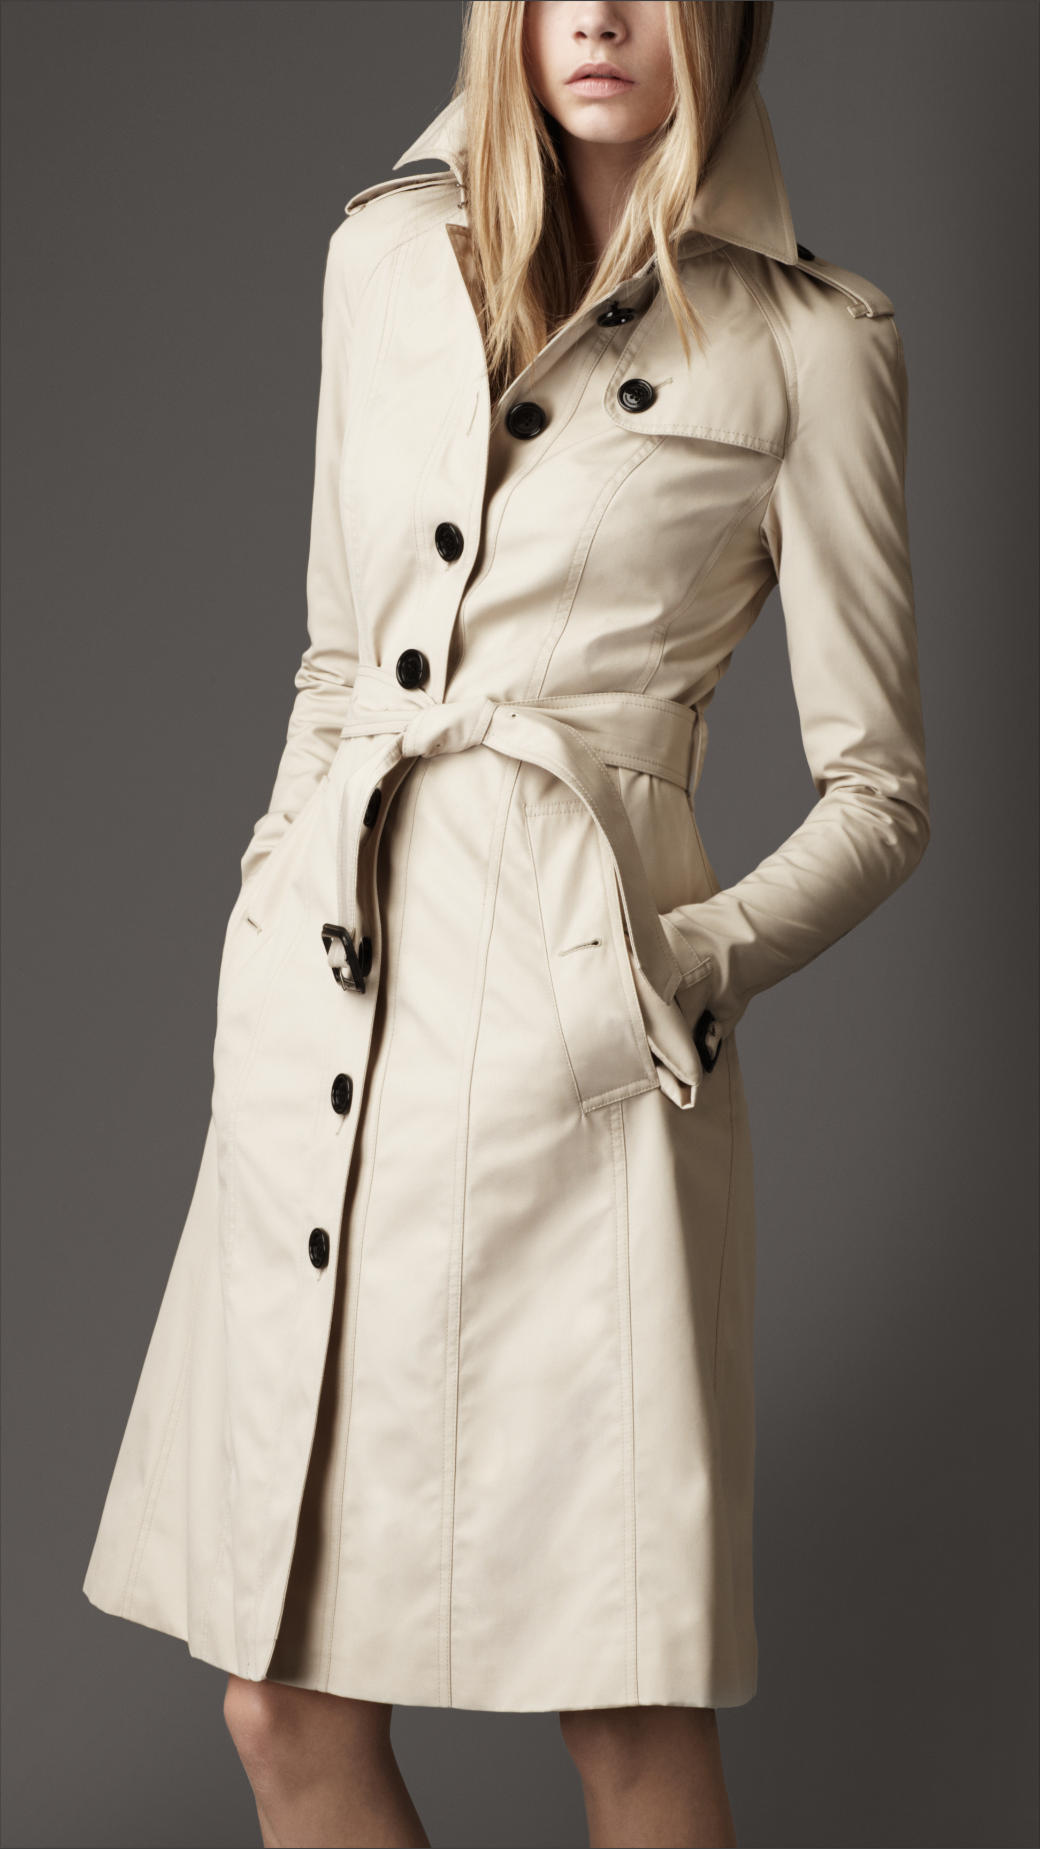 Lyst - Burberry Long Cotton Blend Single Breasted Trench Coat in Natural